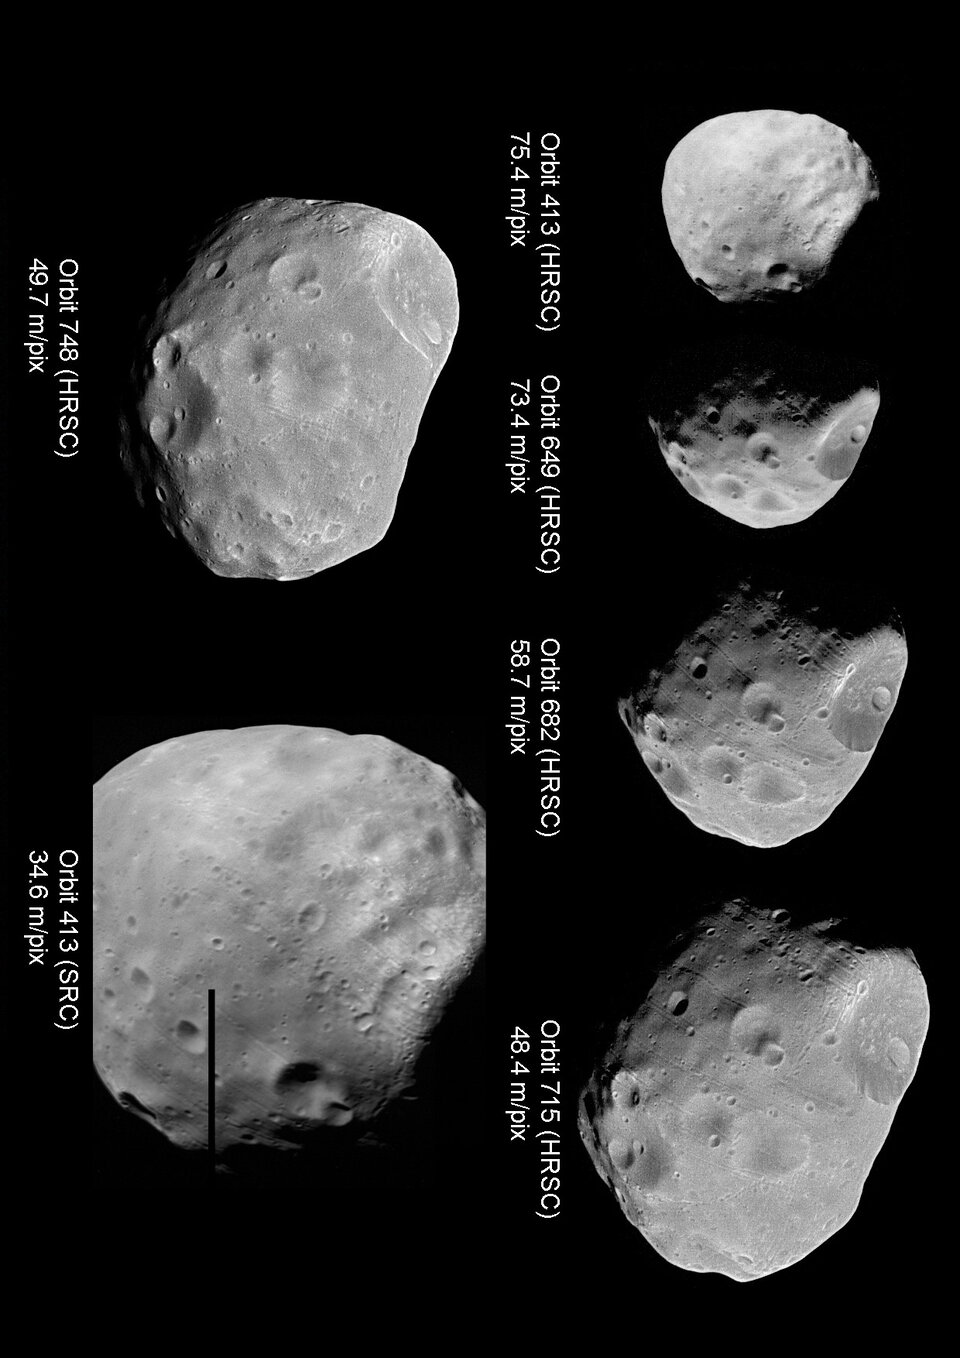 Collection of Phobos images from different orbit passes